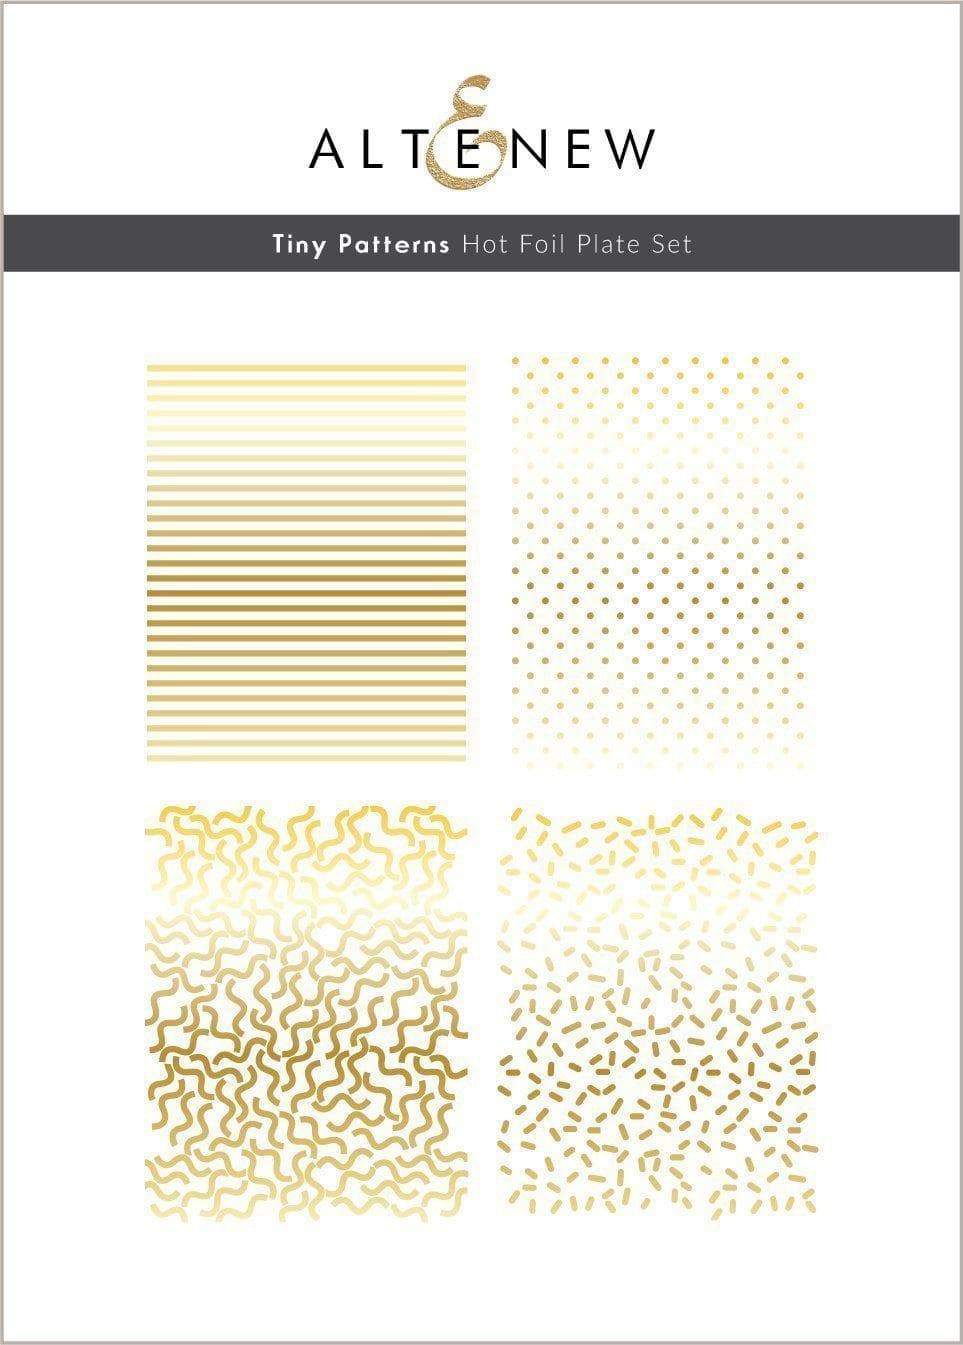 Hot Foil Plate Tiny Patterns Hot Foil Plate Set (4 in 1)